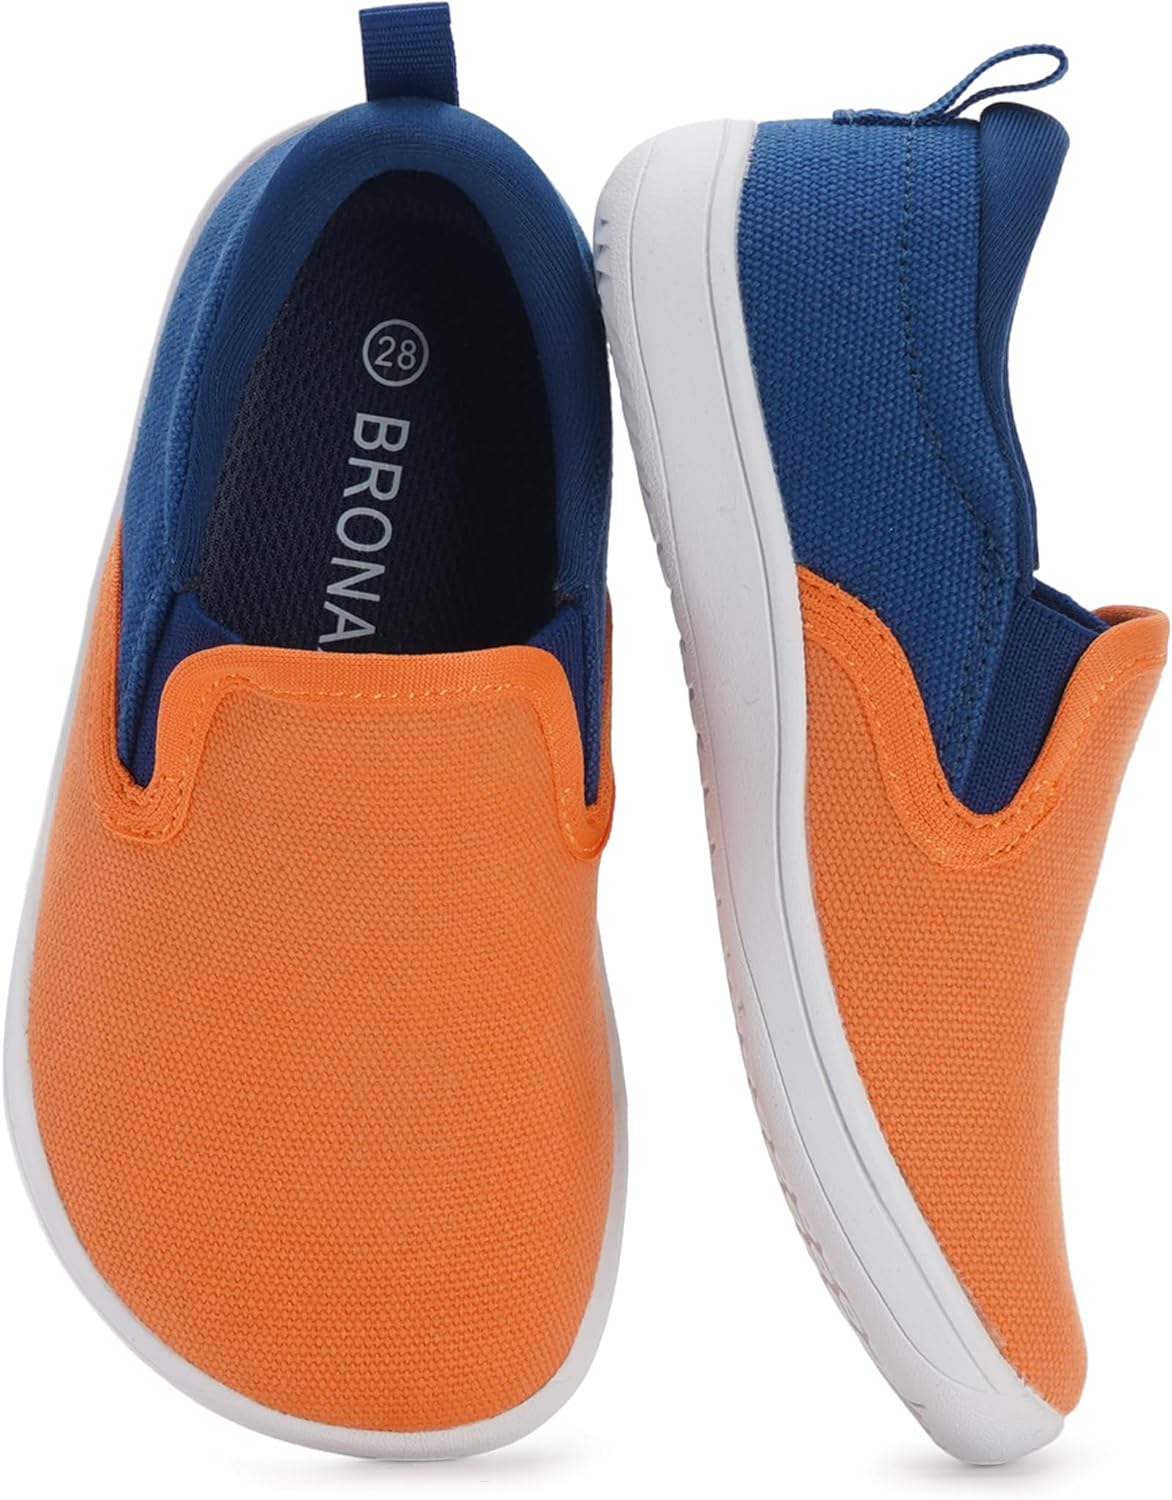 Great fit on my son feet. Easy slip-on. Very comfortable and allows his toes to have more space.